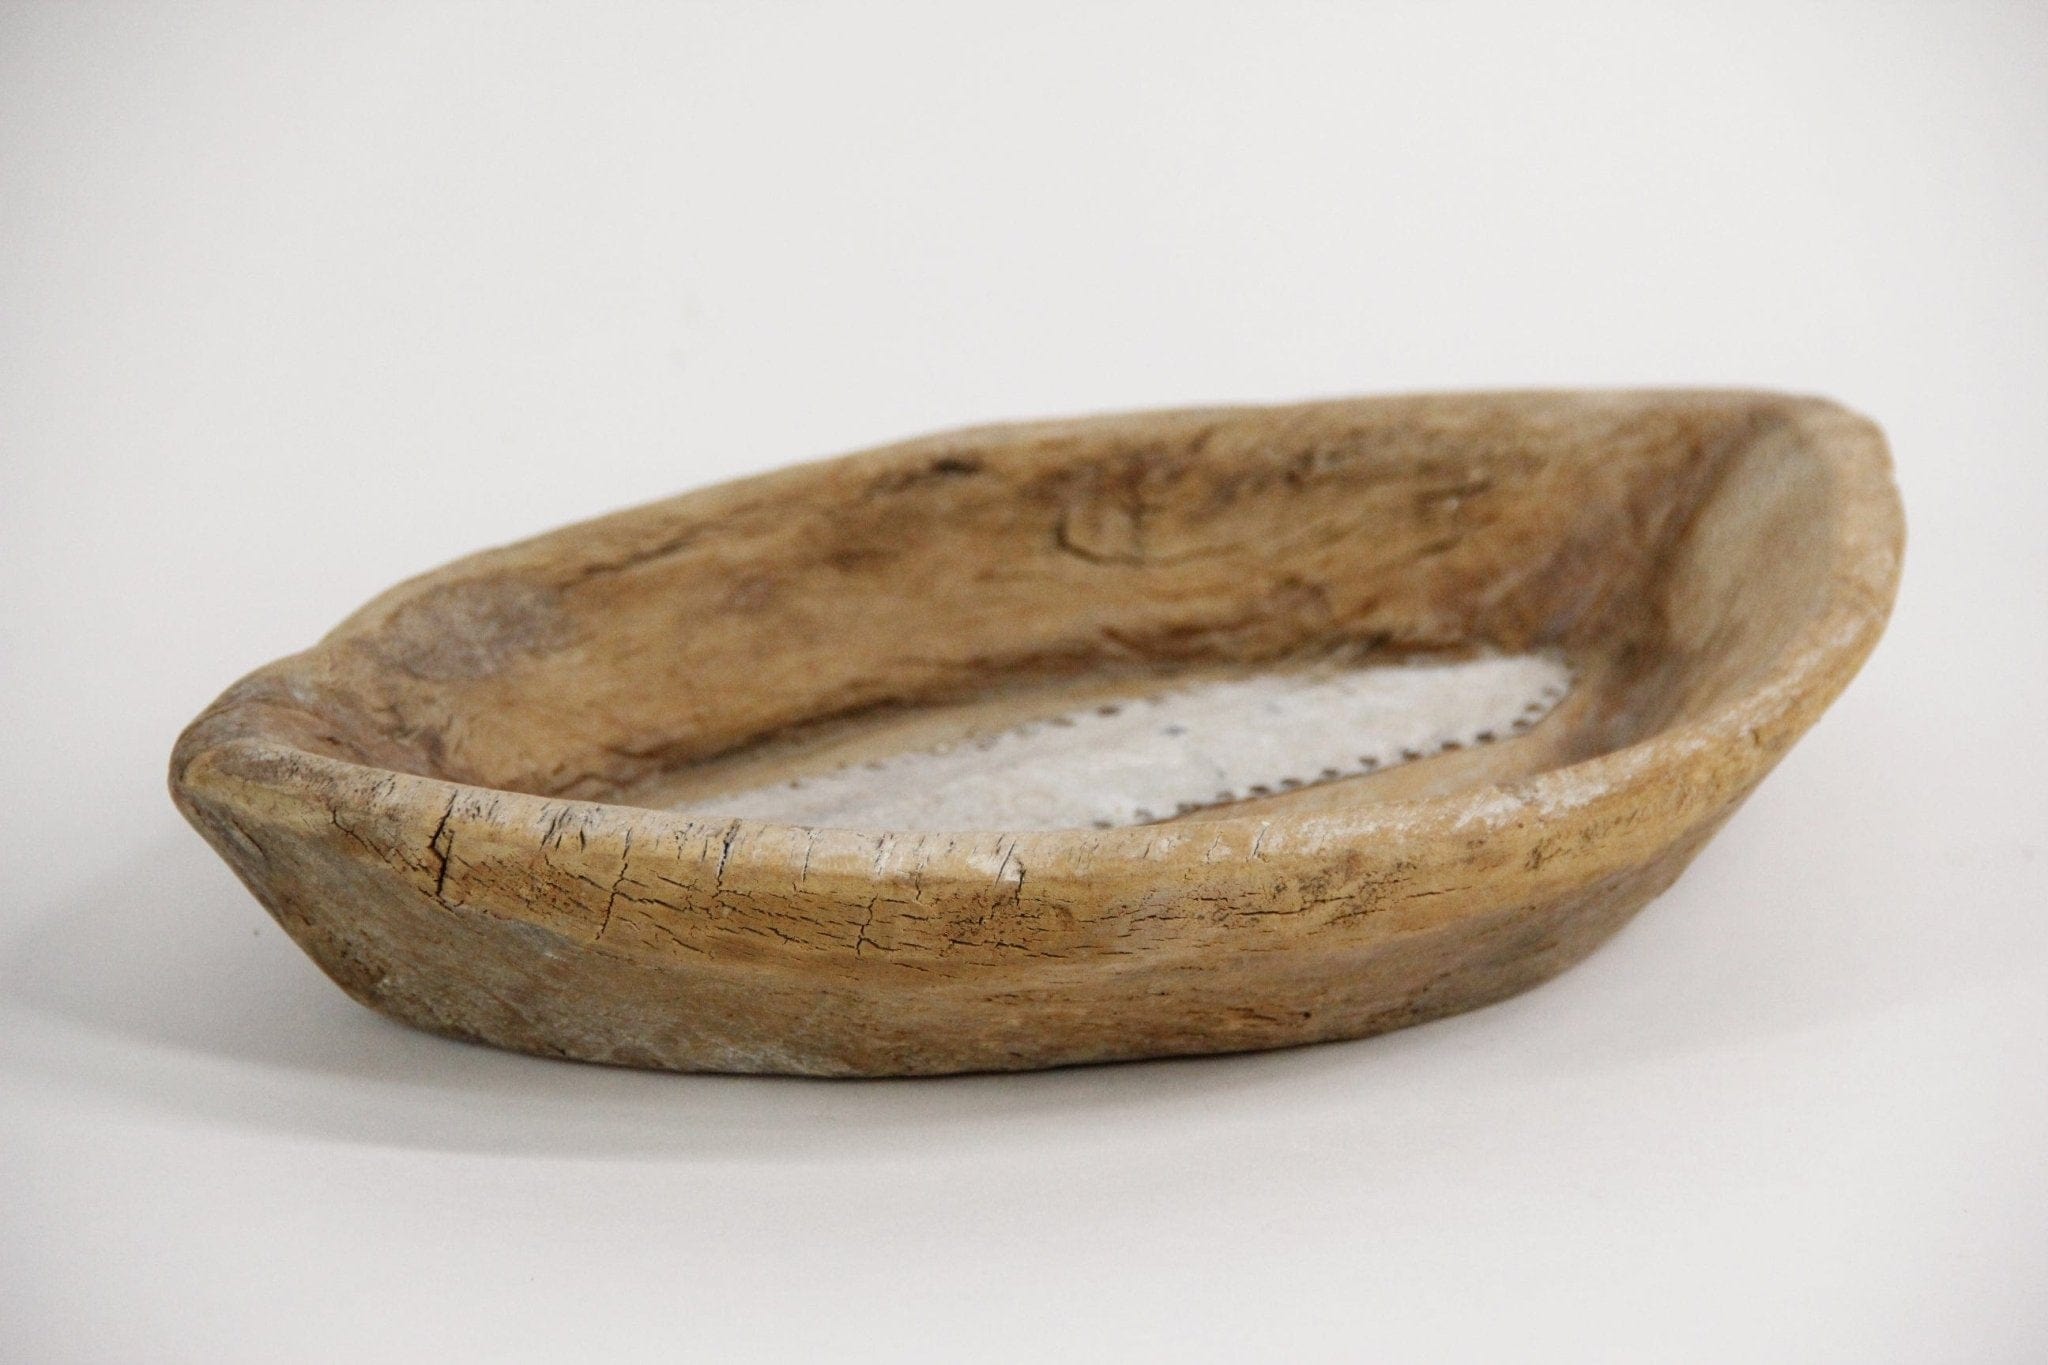 Vintage Wooden Bowl |  Oblong Patched Tray Bowl